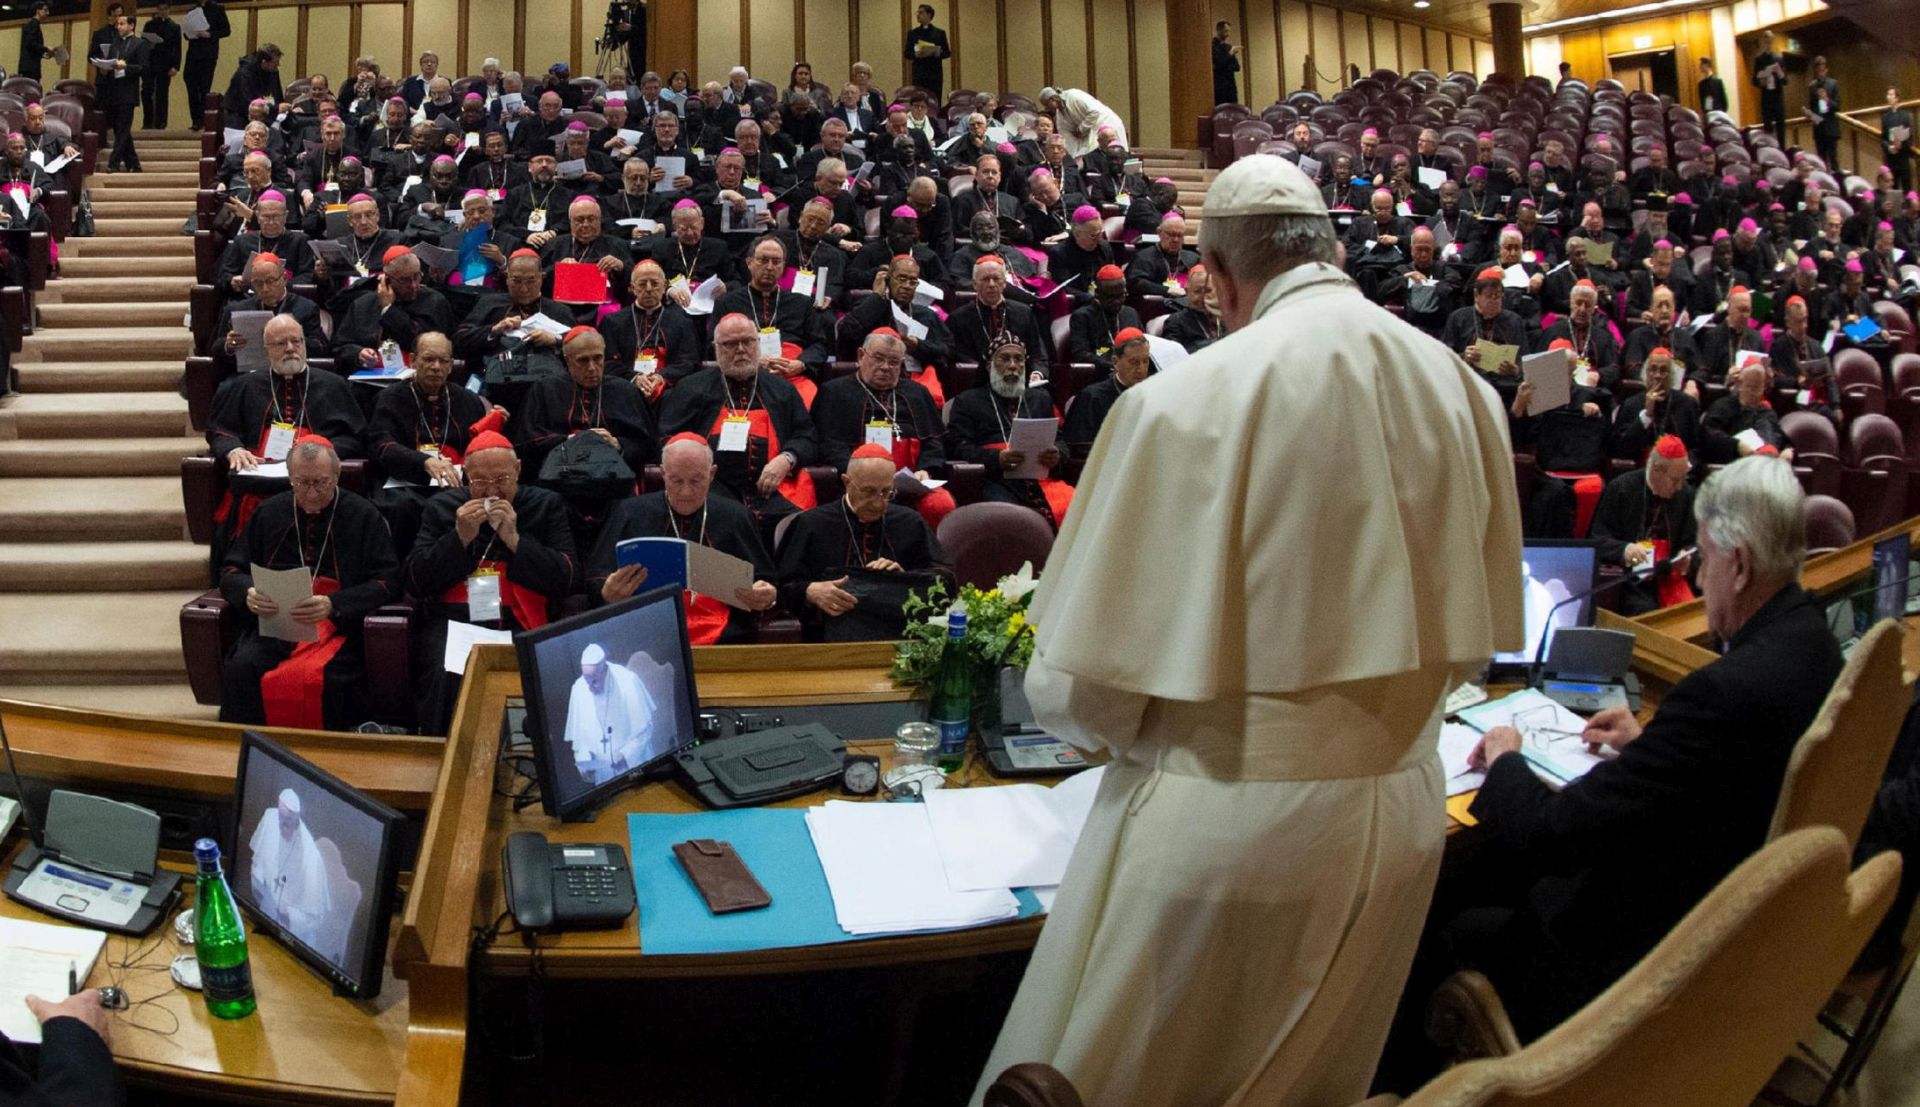 epa07385153 A handout picture taken with a fish eye lens provided by the Vatican Media shows Pope Francis attending opening session of a global child protection summit for reflections on the sex abuse crisis within the Catholic Church, at the Vatican, 21 February 2019. The gathering of church leaders from around the globe is taking place amid intense scrutiny of the Catholic Church's record after new allegations of abuse and cover-up last year sparked a credibility crisis for the hierarchy.  EPA/VATICAN MEDIA HANDOUT  HANDOUT EDITORIAL USE ONLY/NO SALES